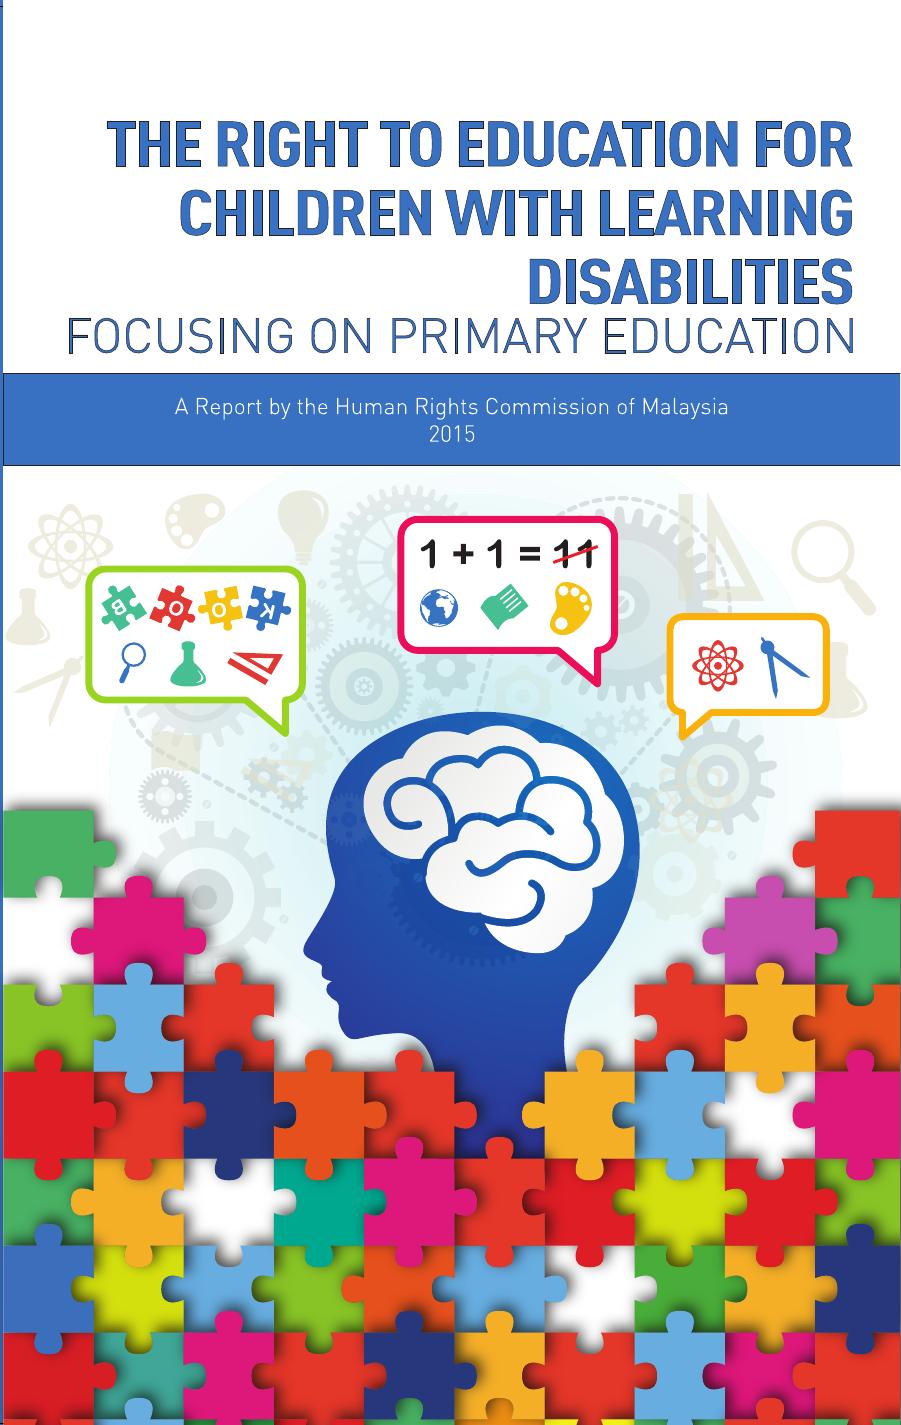 THE RIGHT TO EDUCATION FOR CHILDREN WITH LEARNING DISABILITIES 2015.pdf